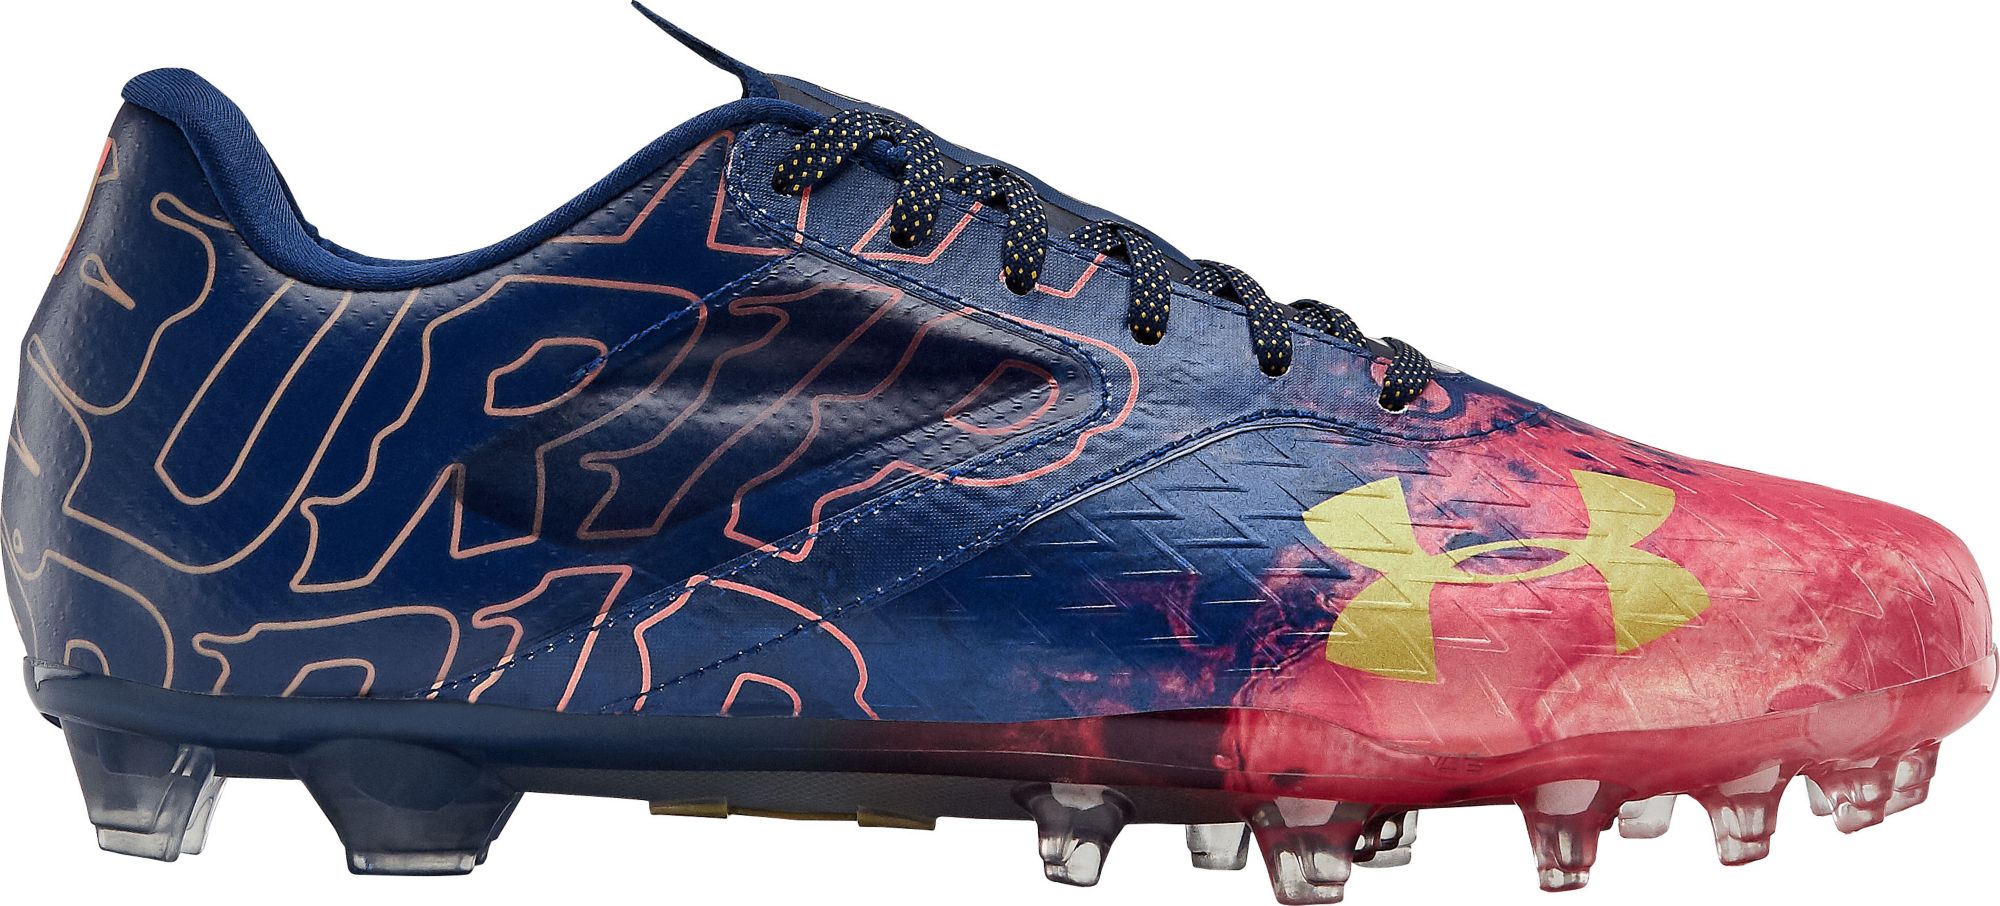 drippy soccer cleats